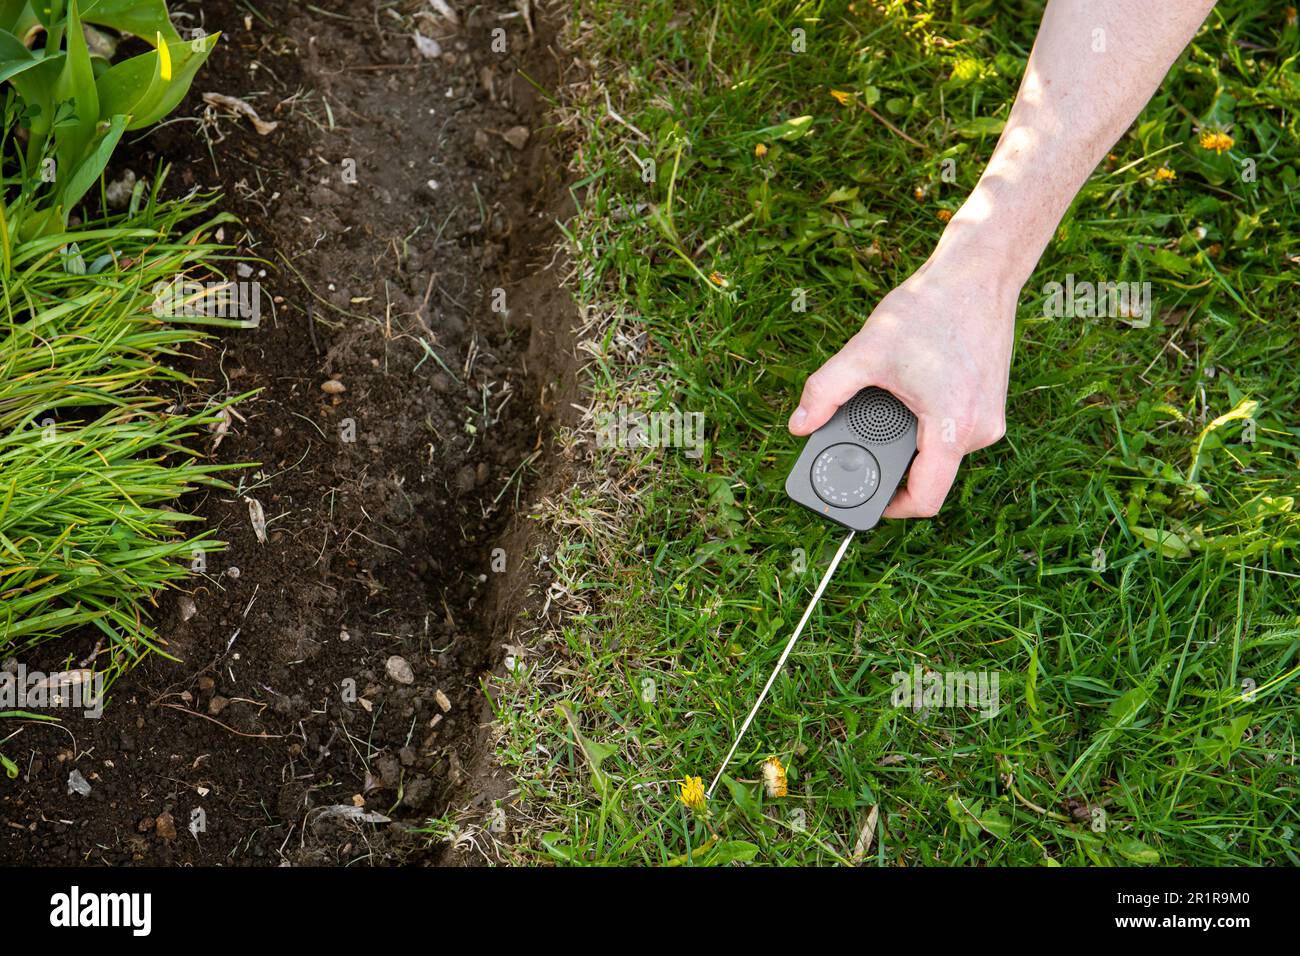 How do you find a break in a robotic mower perimeter wire. Person man hand using AM radio interference signal to locate broken part of the wire. Stock Photo